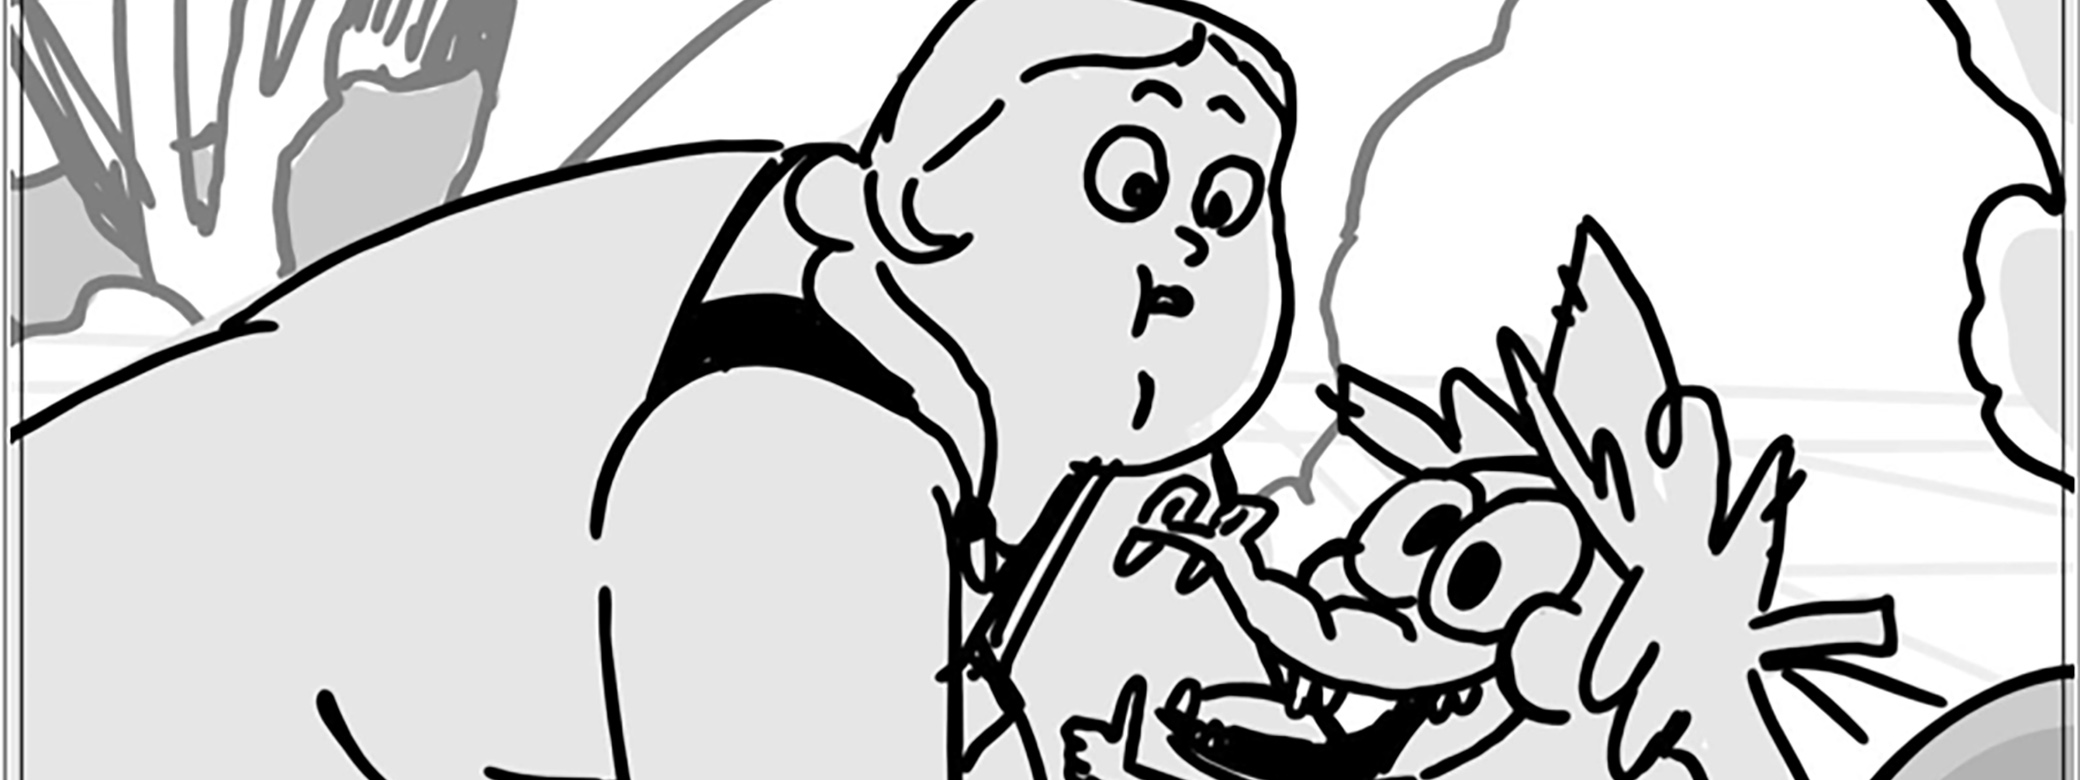 Detail of a storyboard for an animated production